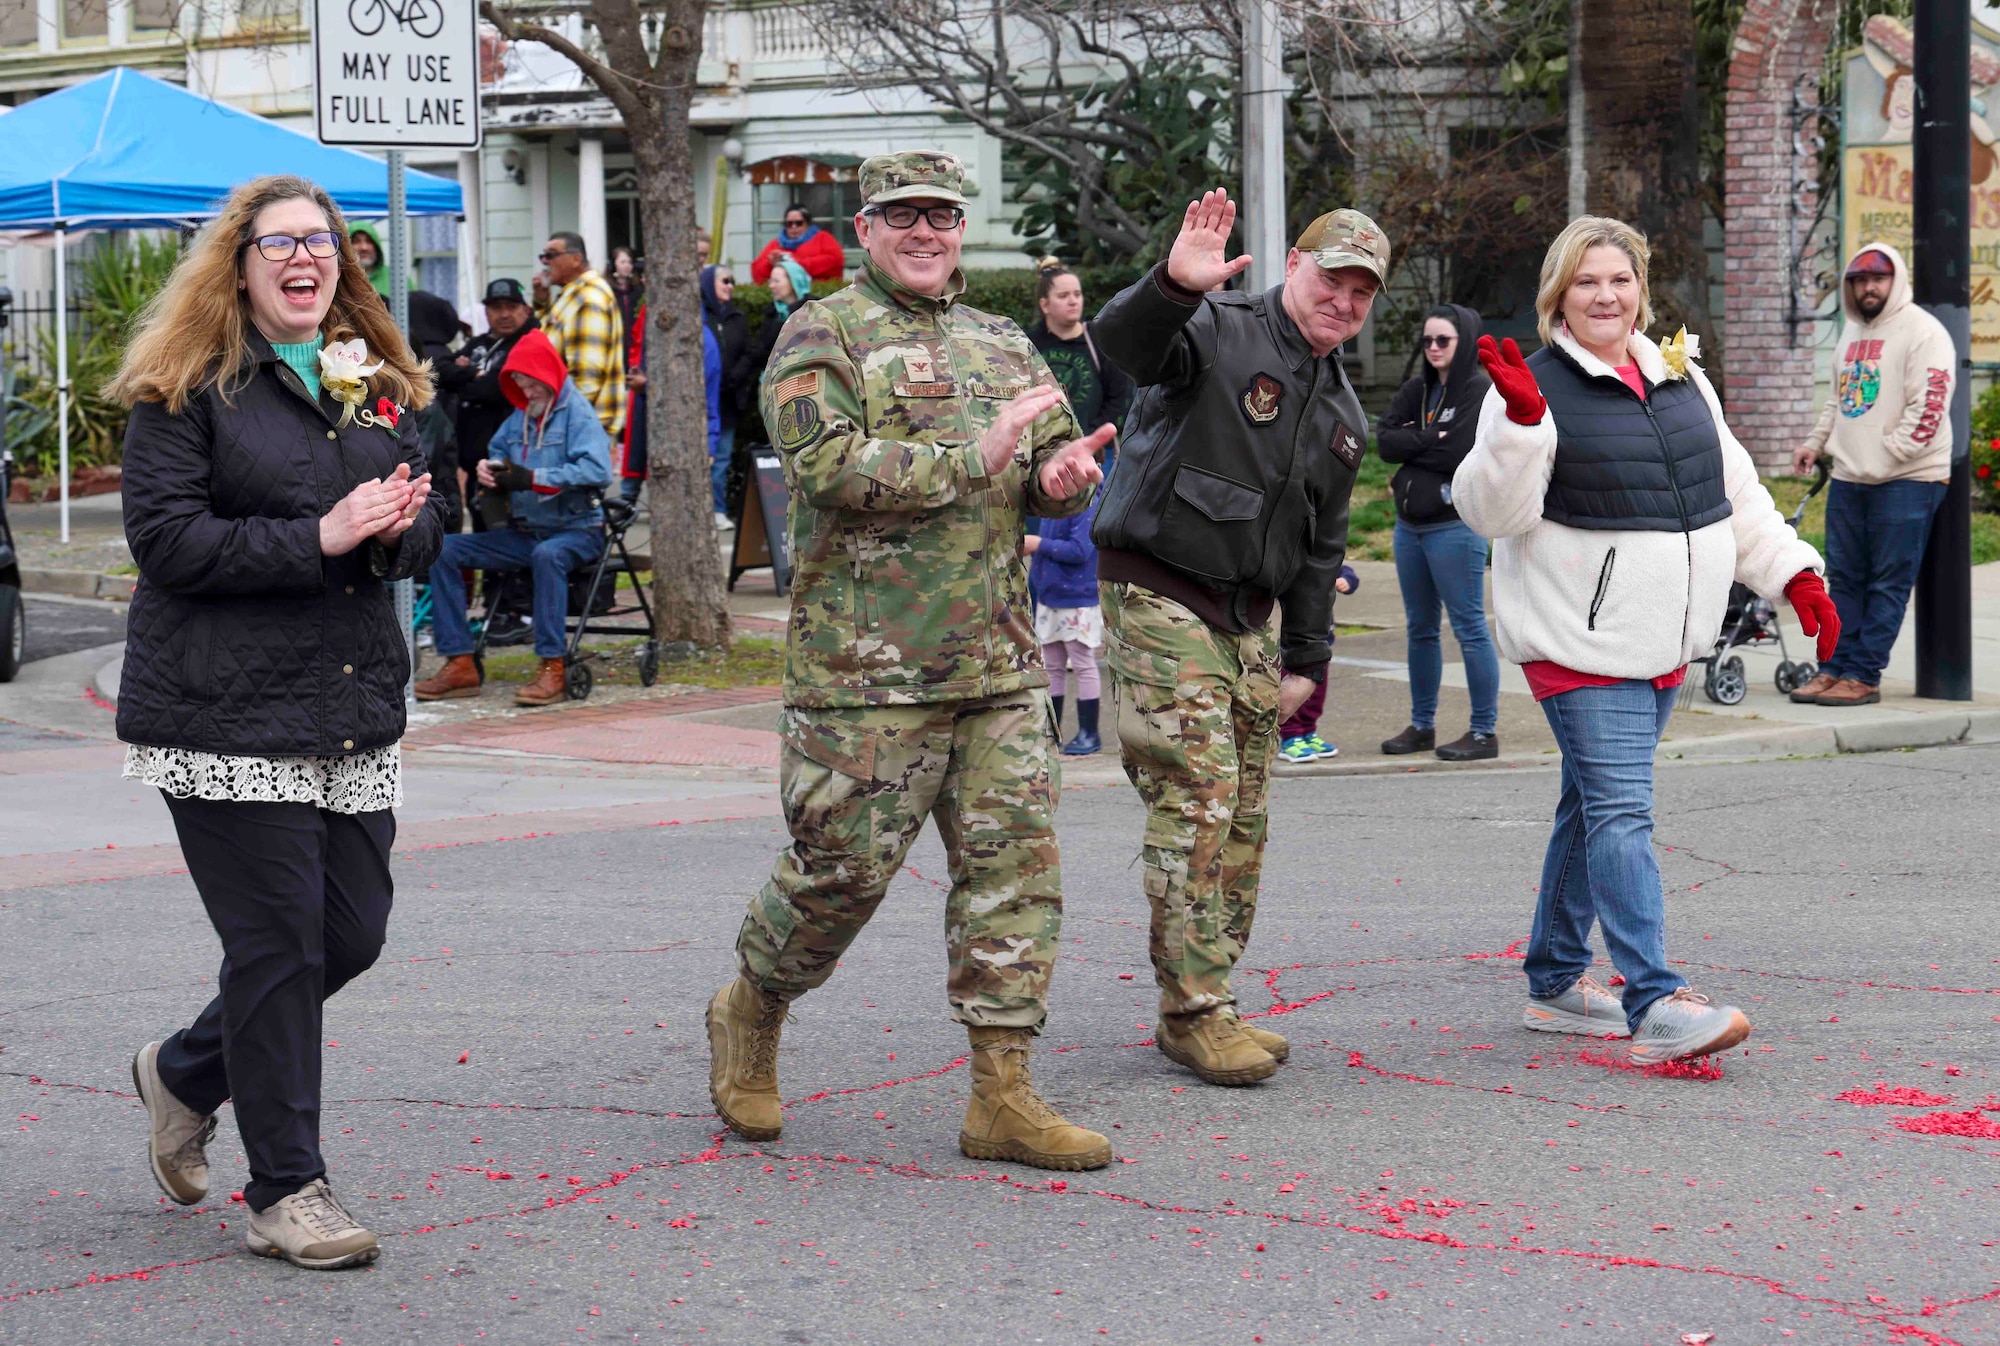 U.S. Air Force Col. Jason Eckberg, 9th Reconnaissance Wing vice commander, and Col. Richard Heaslip, 940th Air Refueling Wing commander, participated in the 143rd Bok Kai parade on Feb, 25, 2023, in Marysville, Calif.